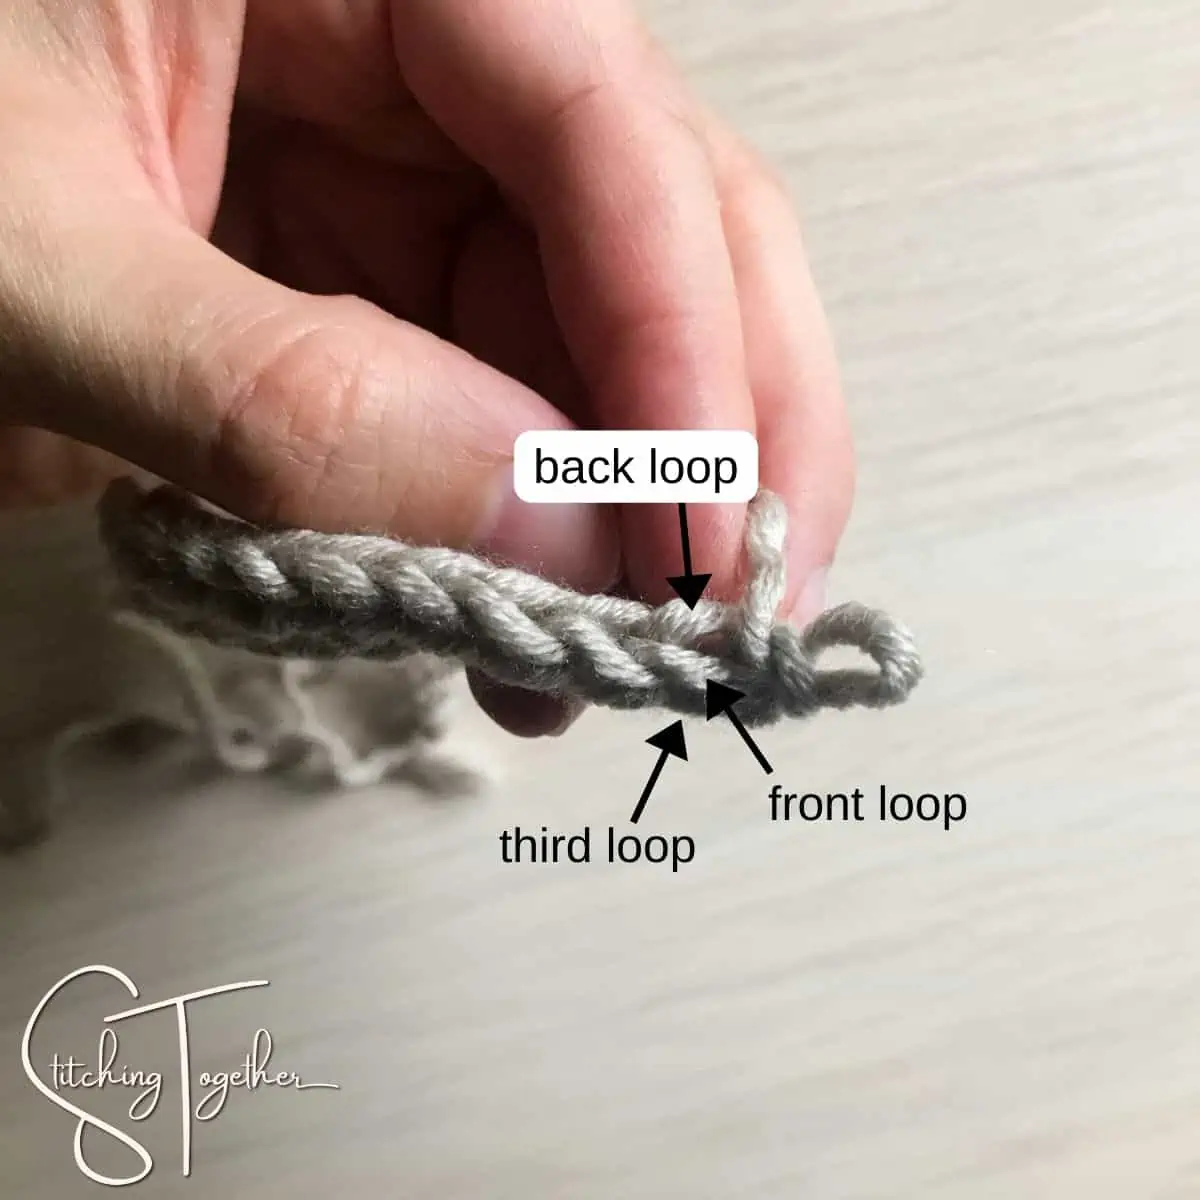 crochet stitches with text pointing out the different parts of a stitch